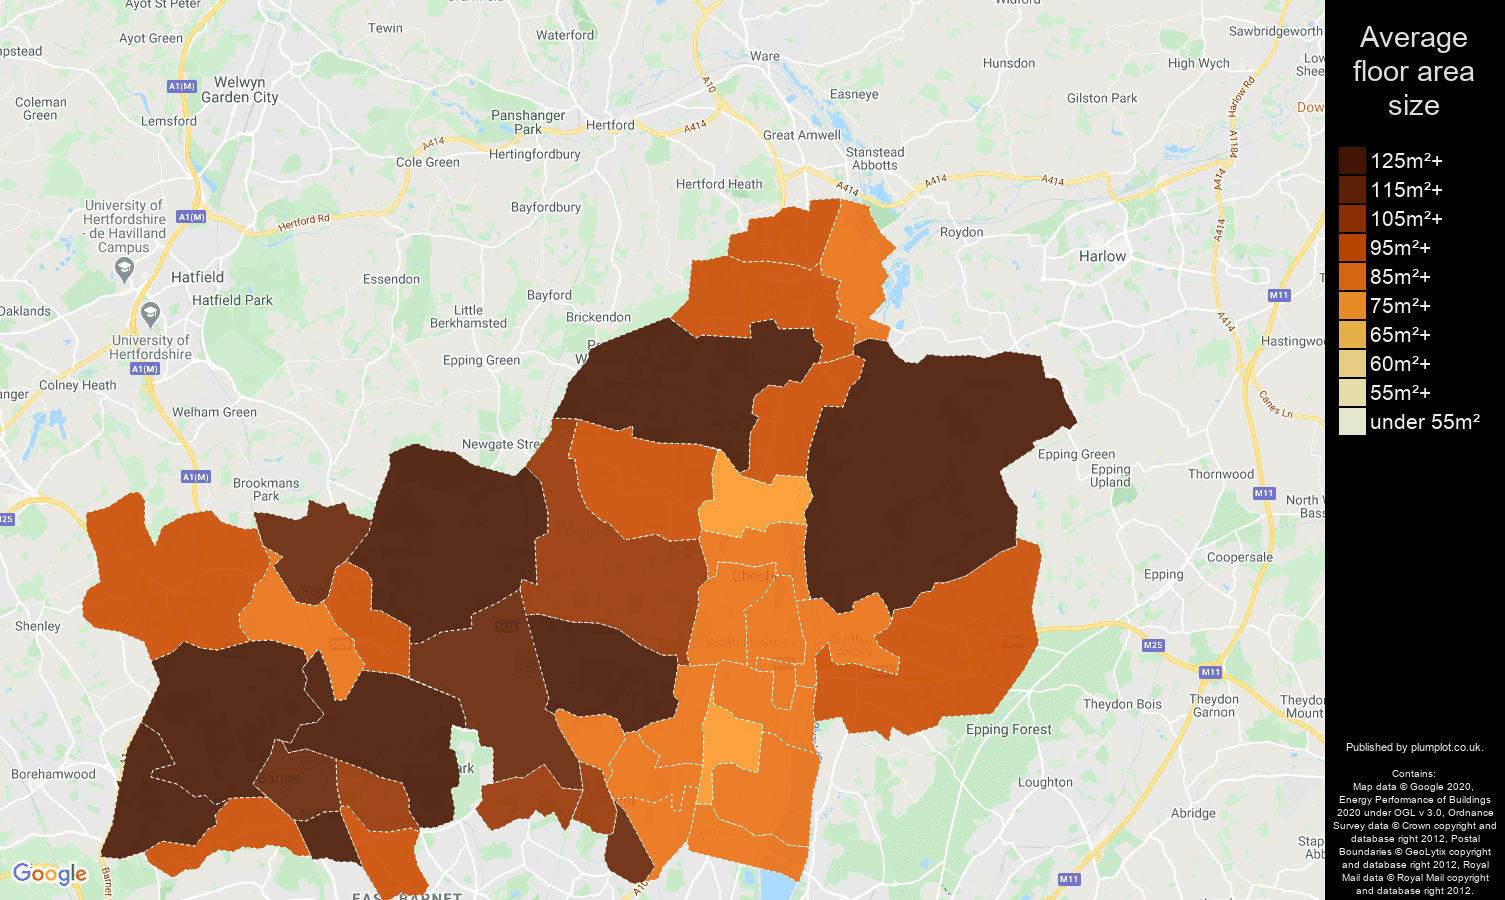 Enfield map of average floor area size of houses